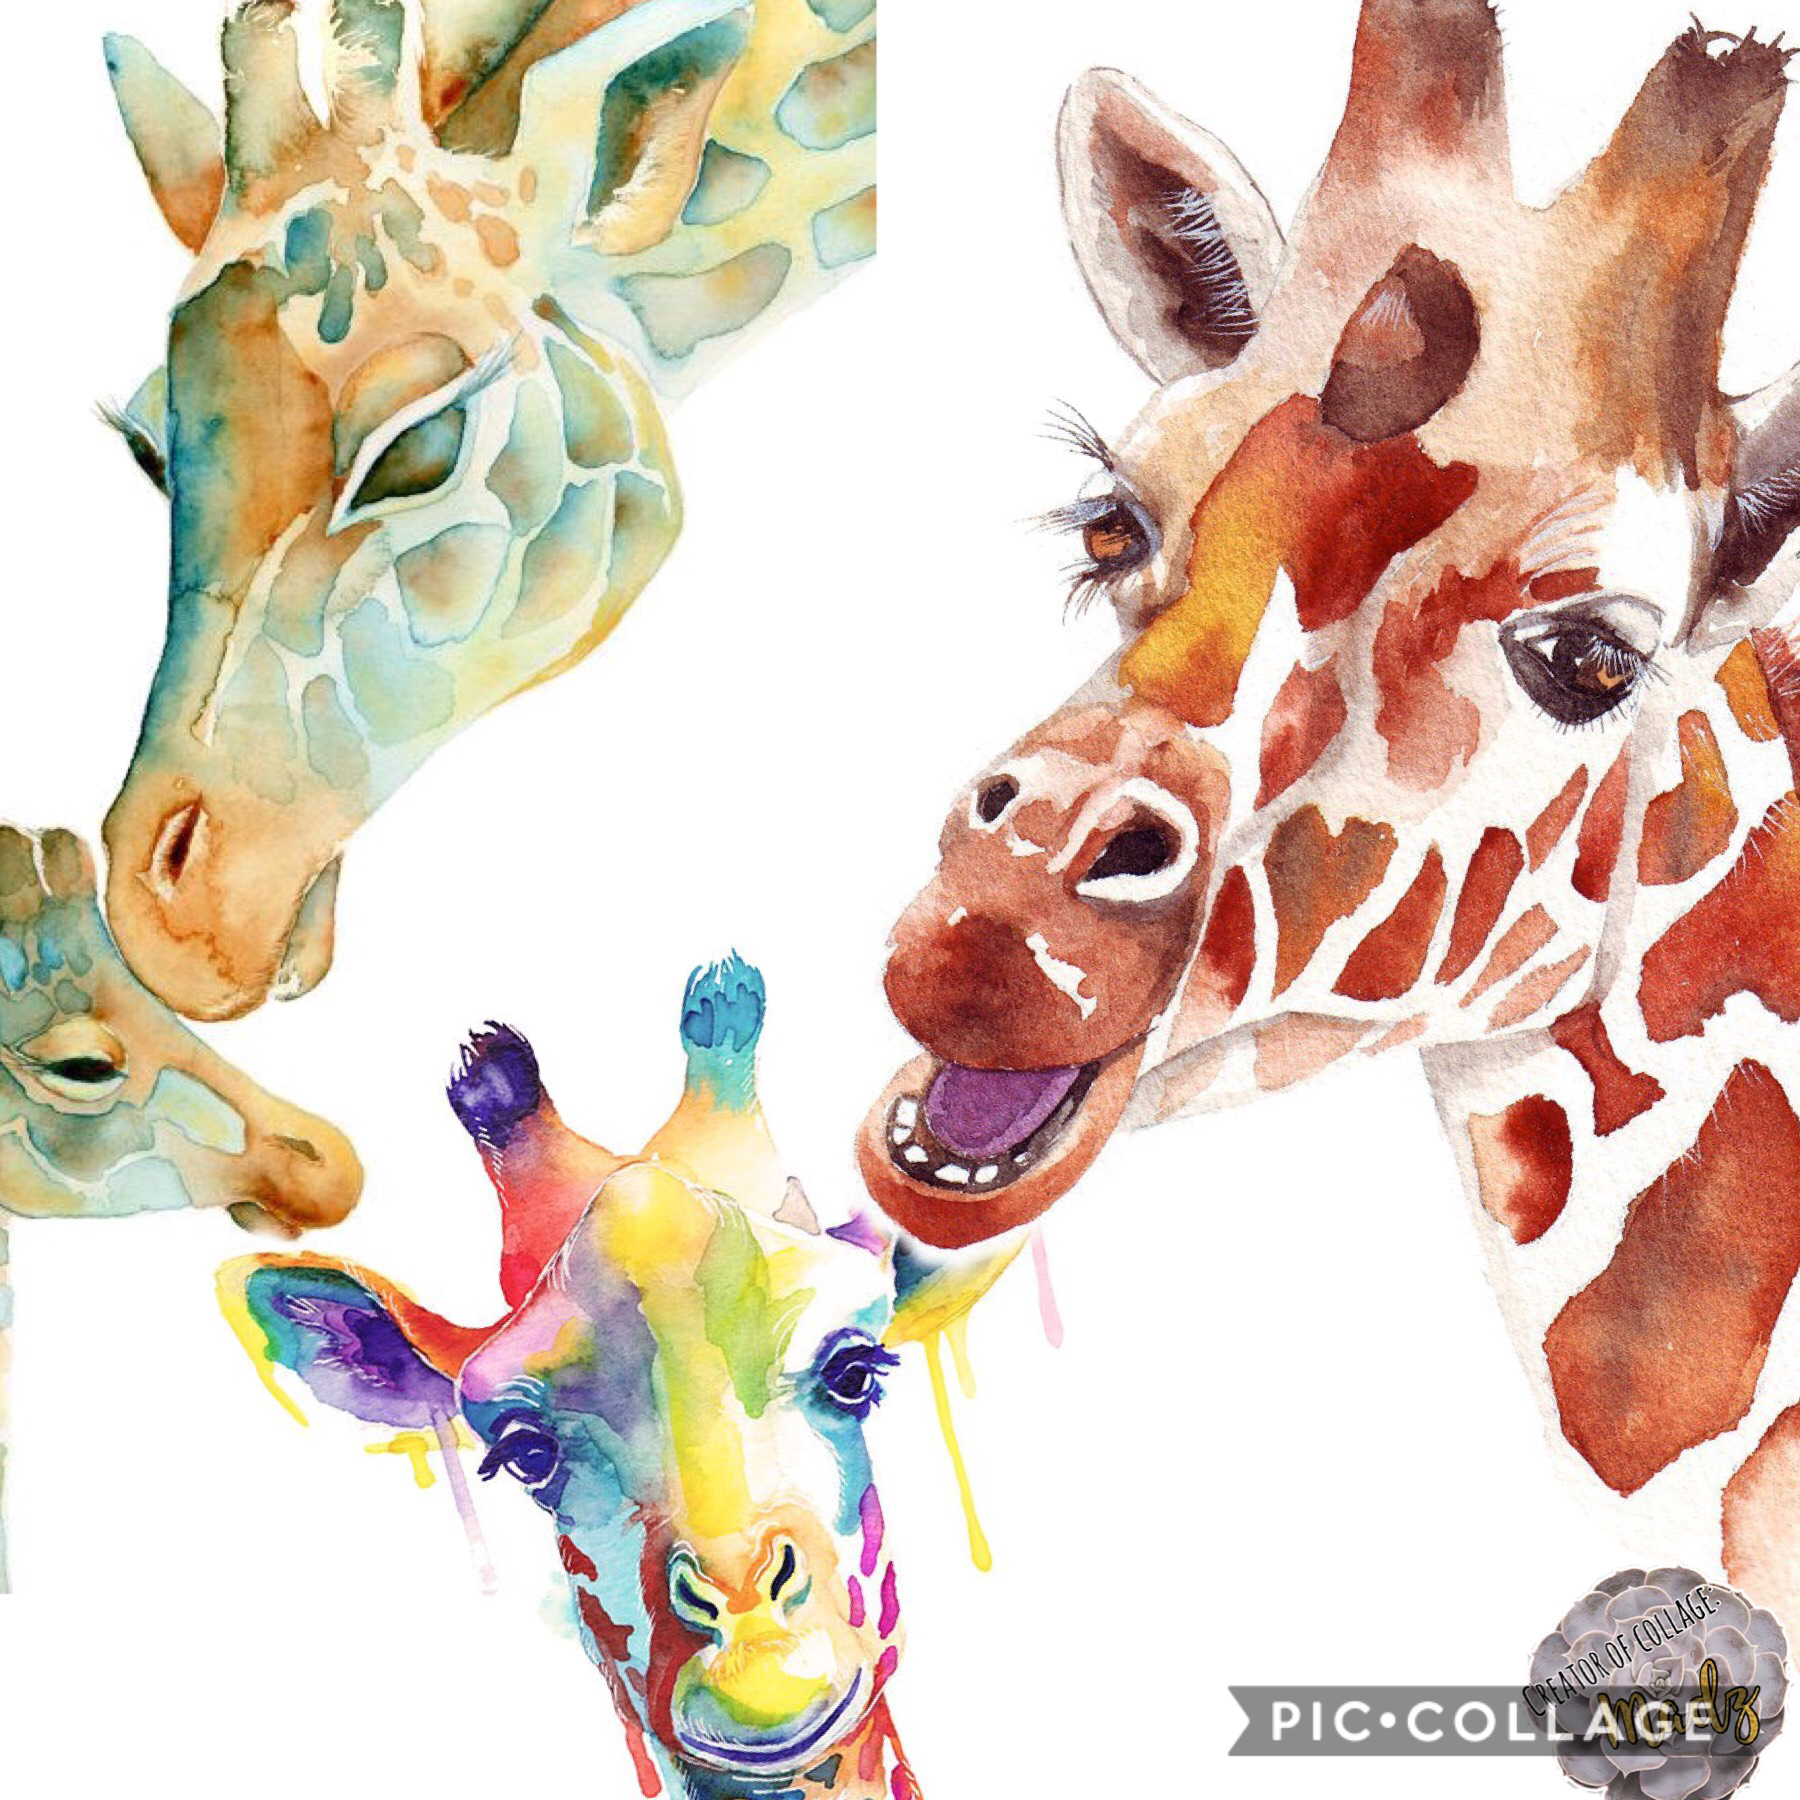 Comment your fave animal/s. One of my fave is giraffe. Bye #madzfam